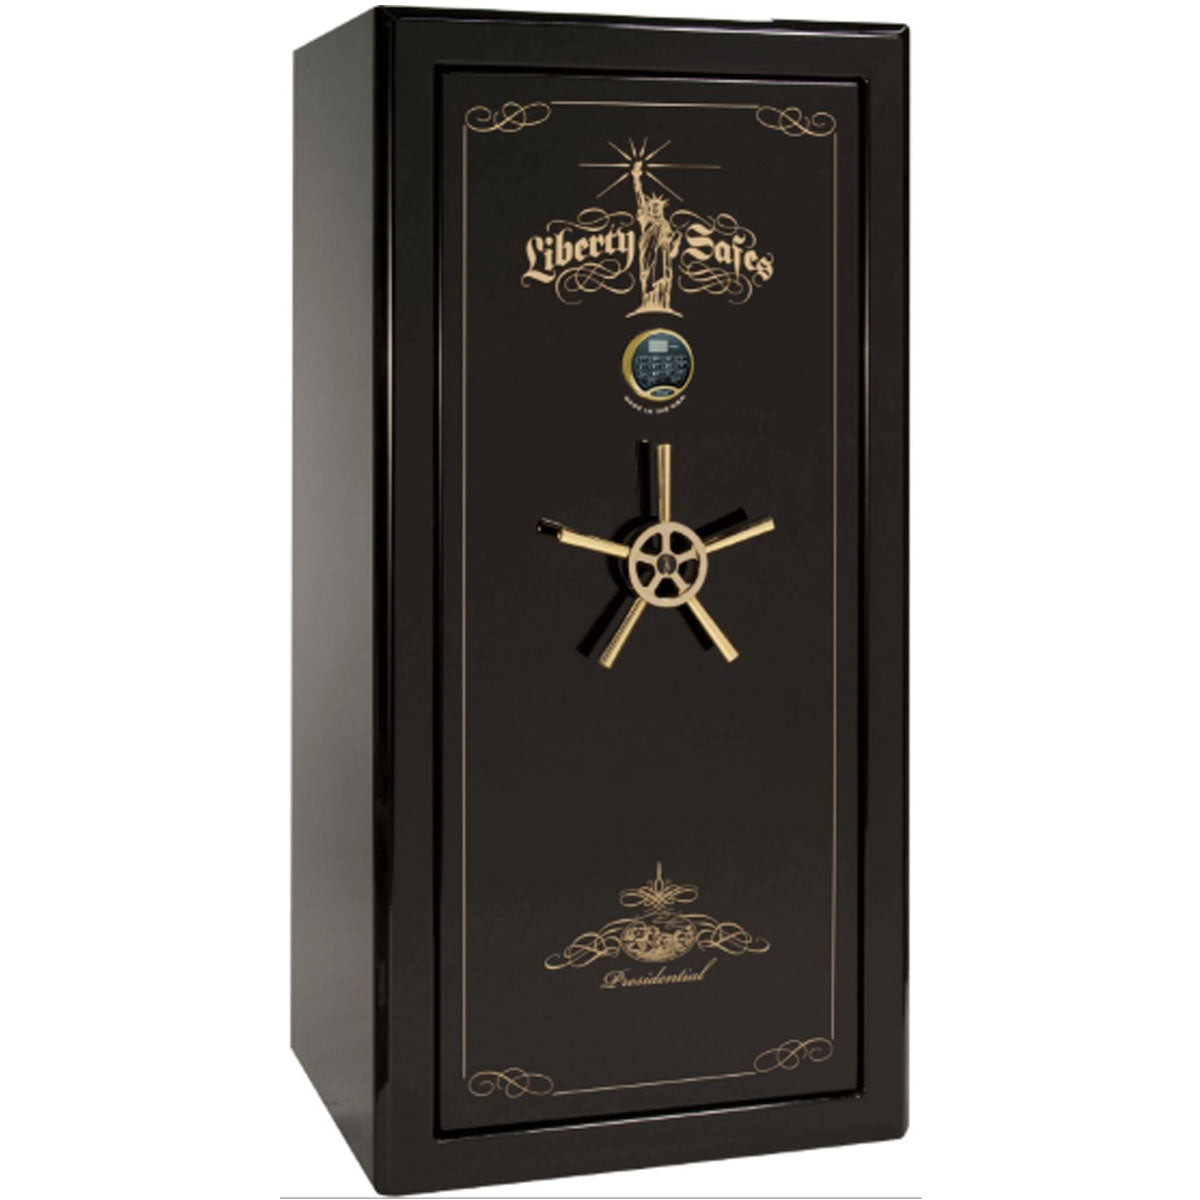 Liberty Safe Presidential 25 in Black Gloss with 24k Gold Electronic Lock, closed door.